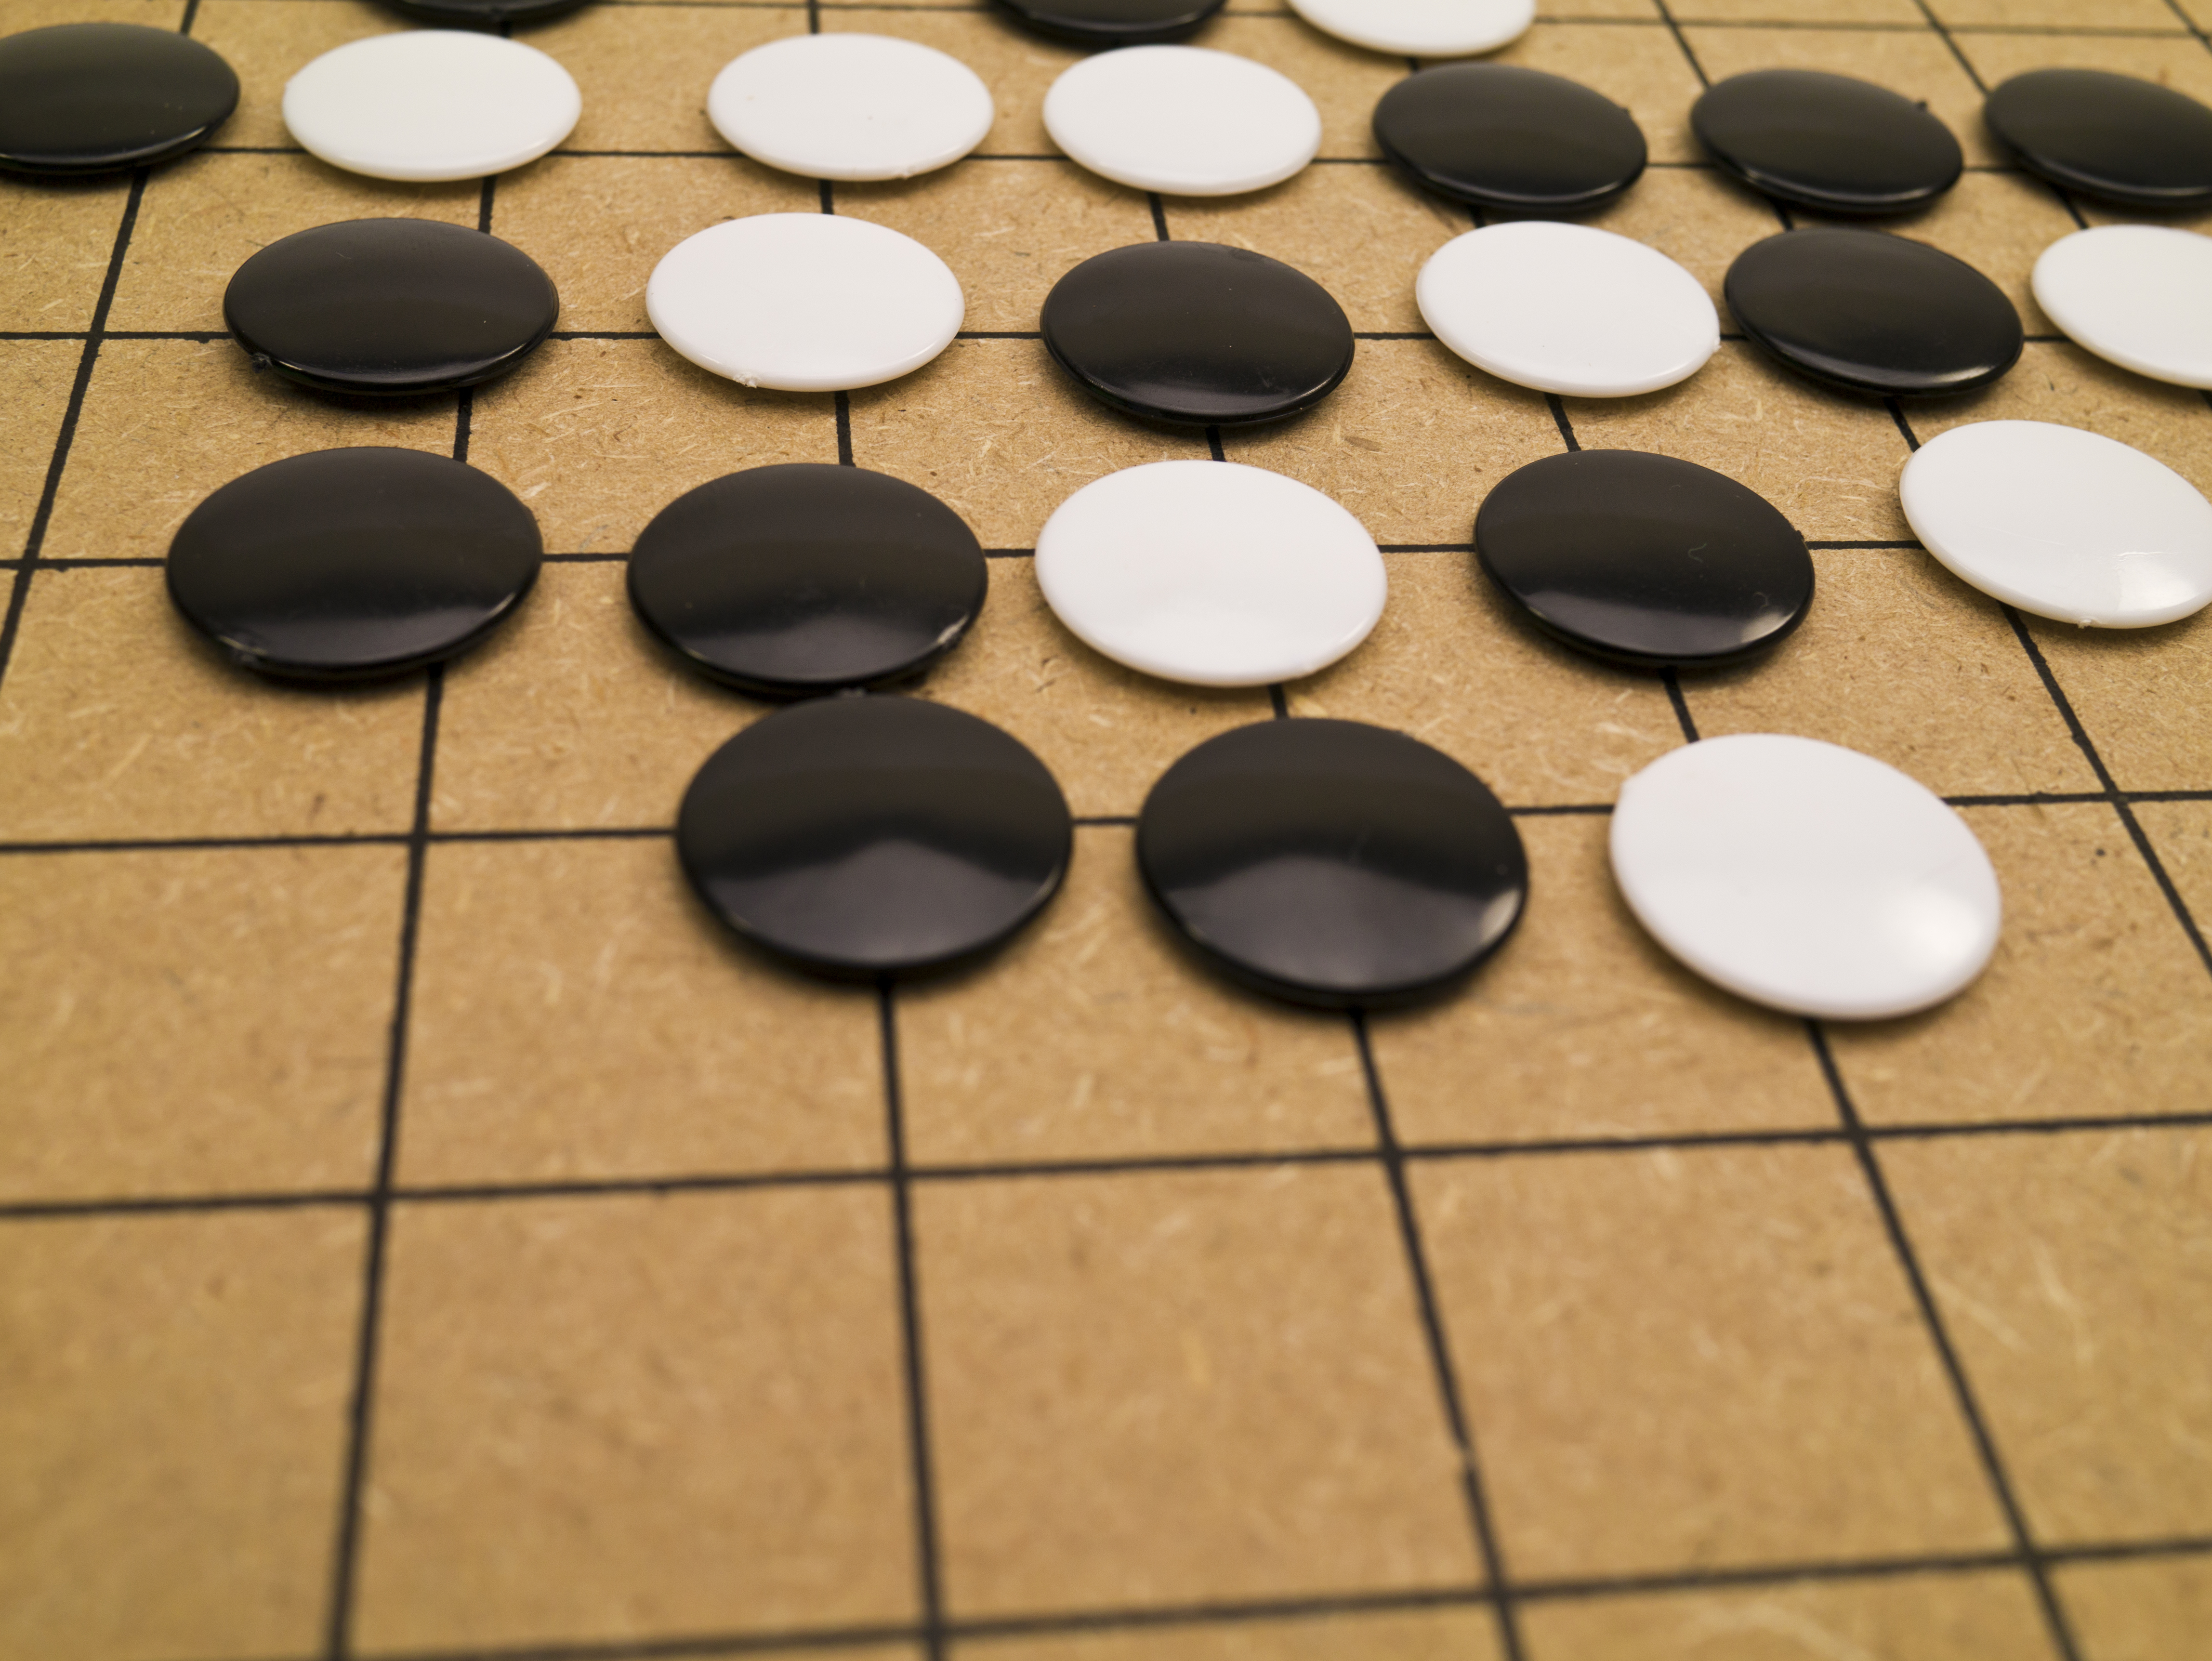 Stones on a Go board (photoncatcher&mdash;Getty Images/iStockphoto)